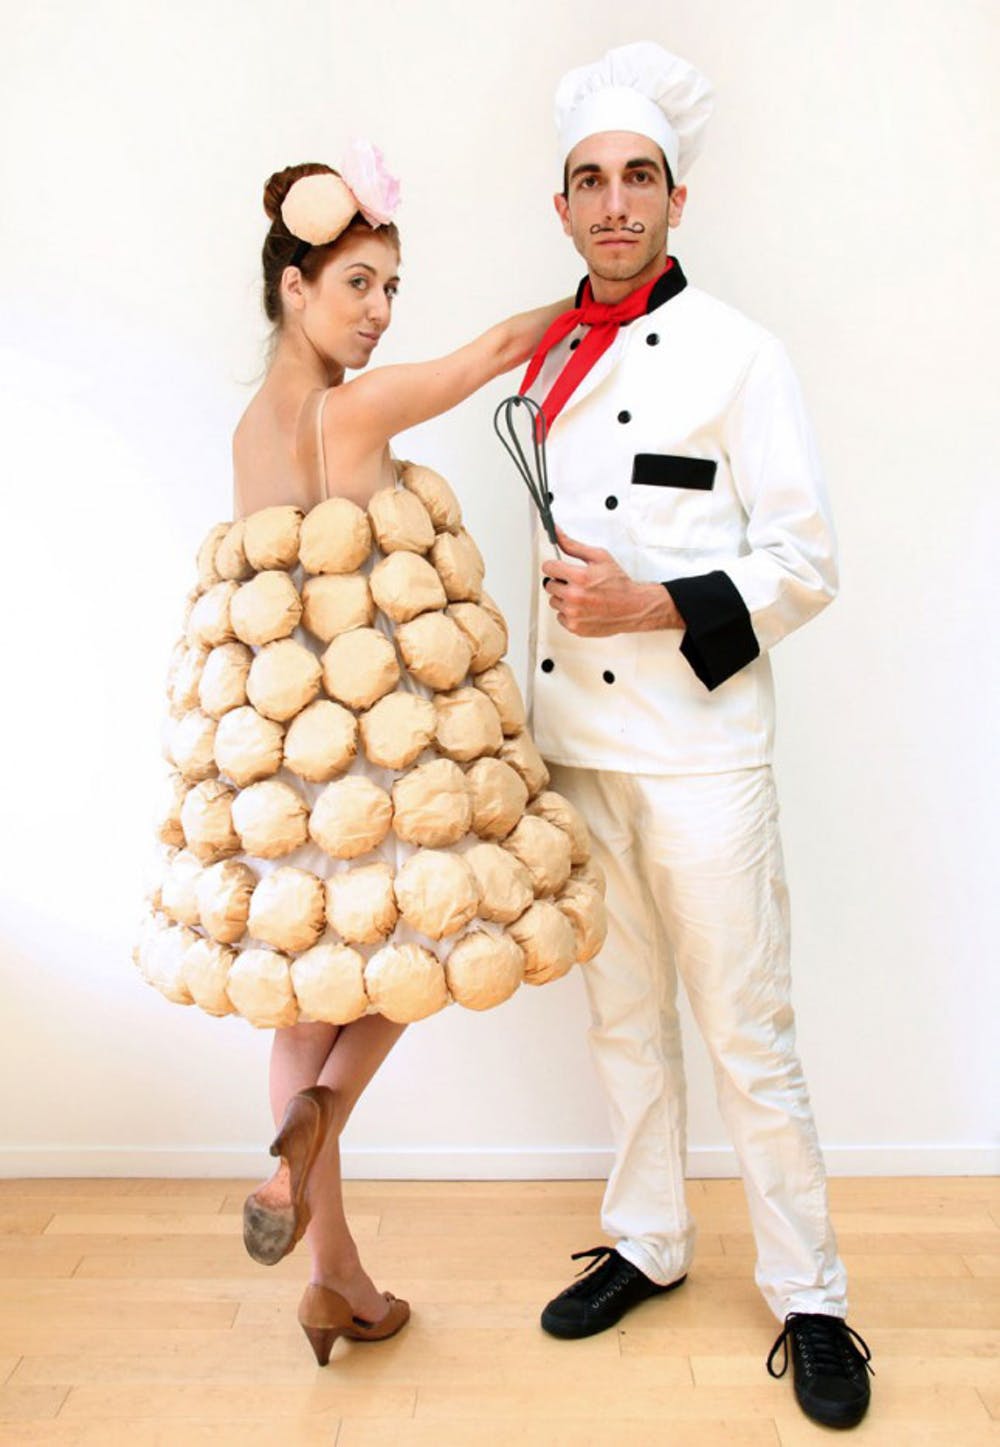 French Baker and French Wedding Cake - Best Couples Halloween Costume